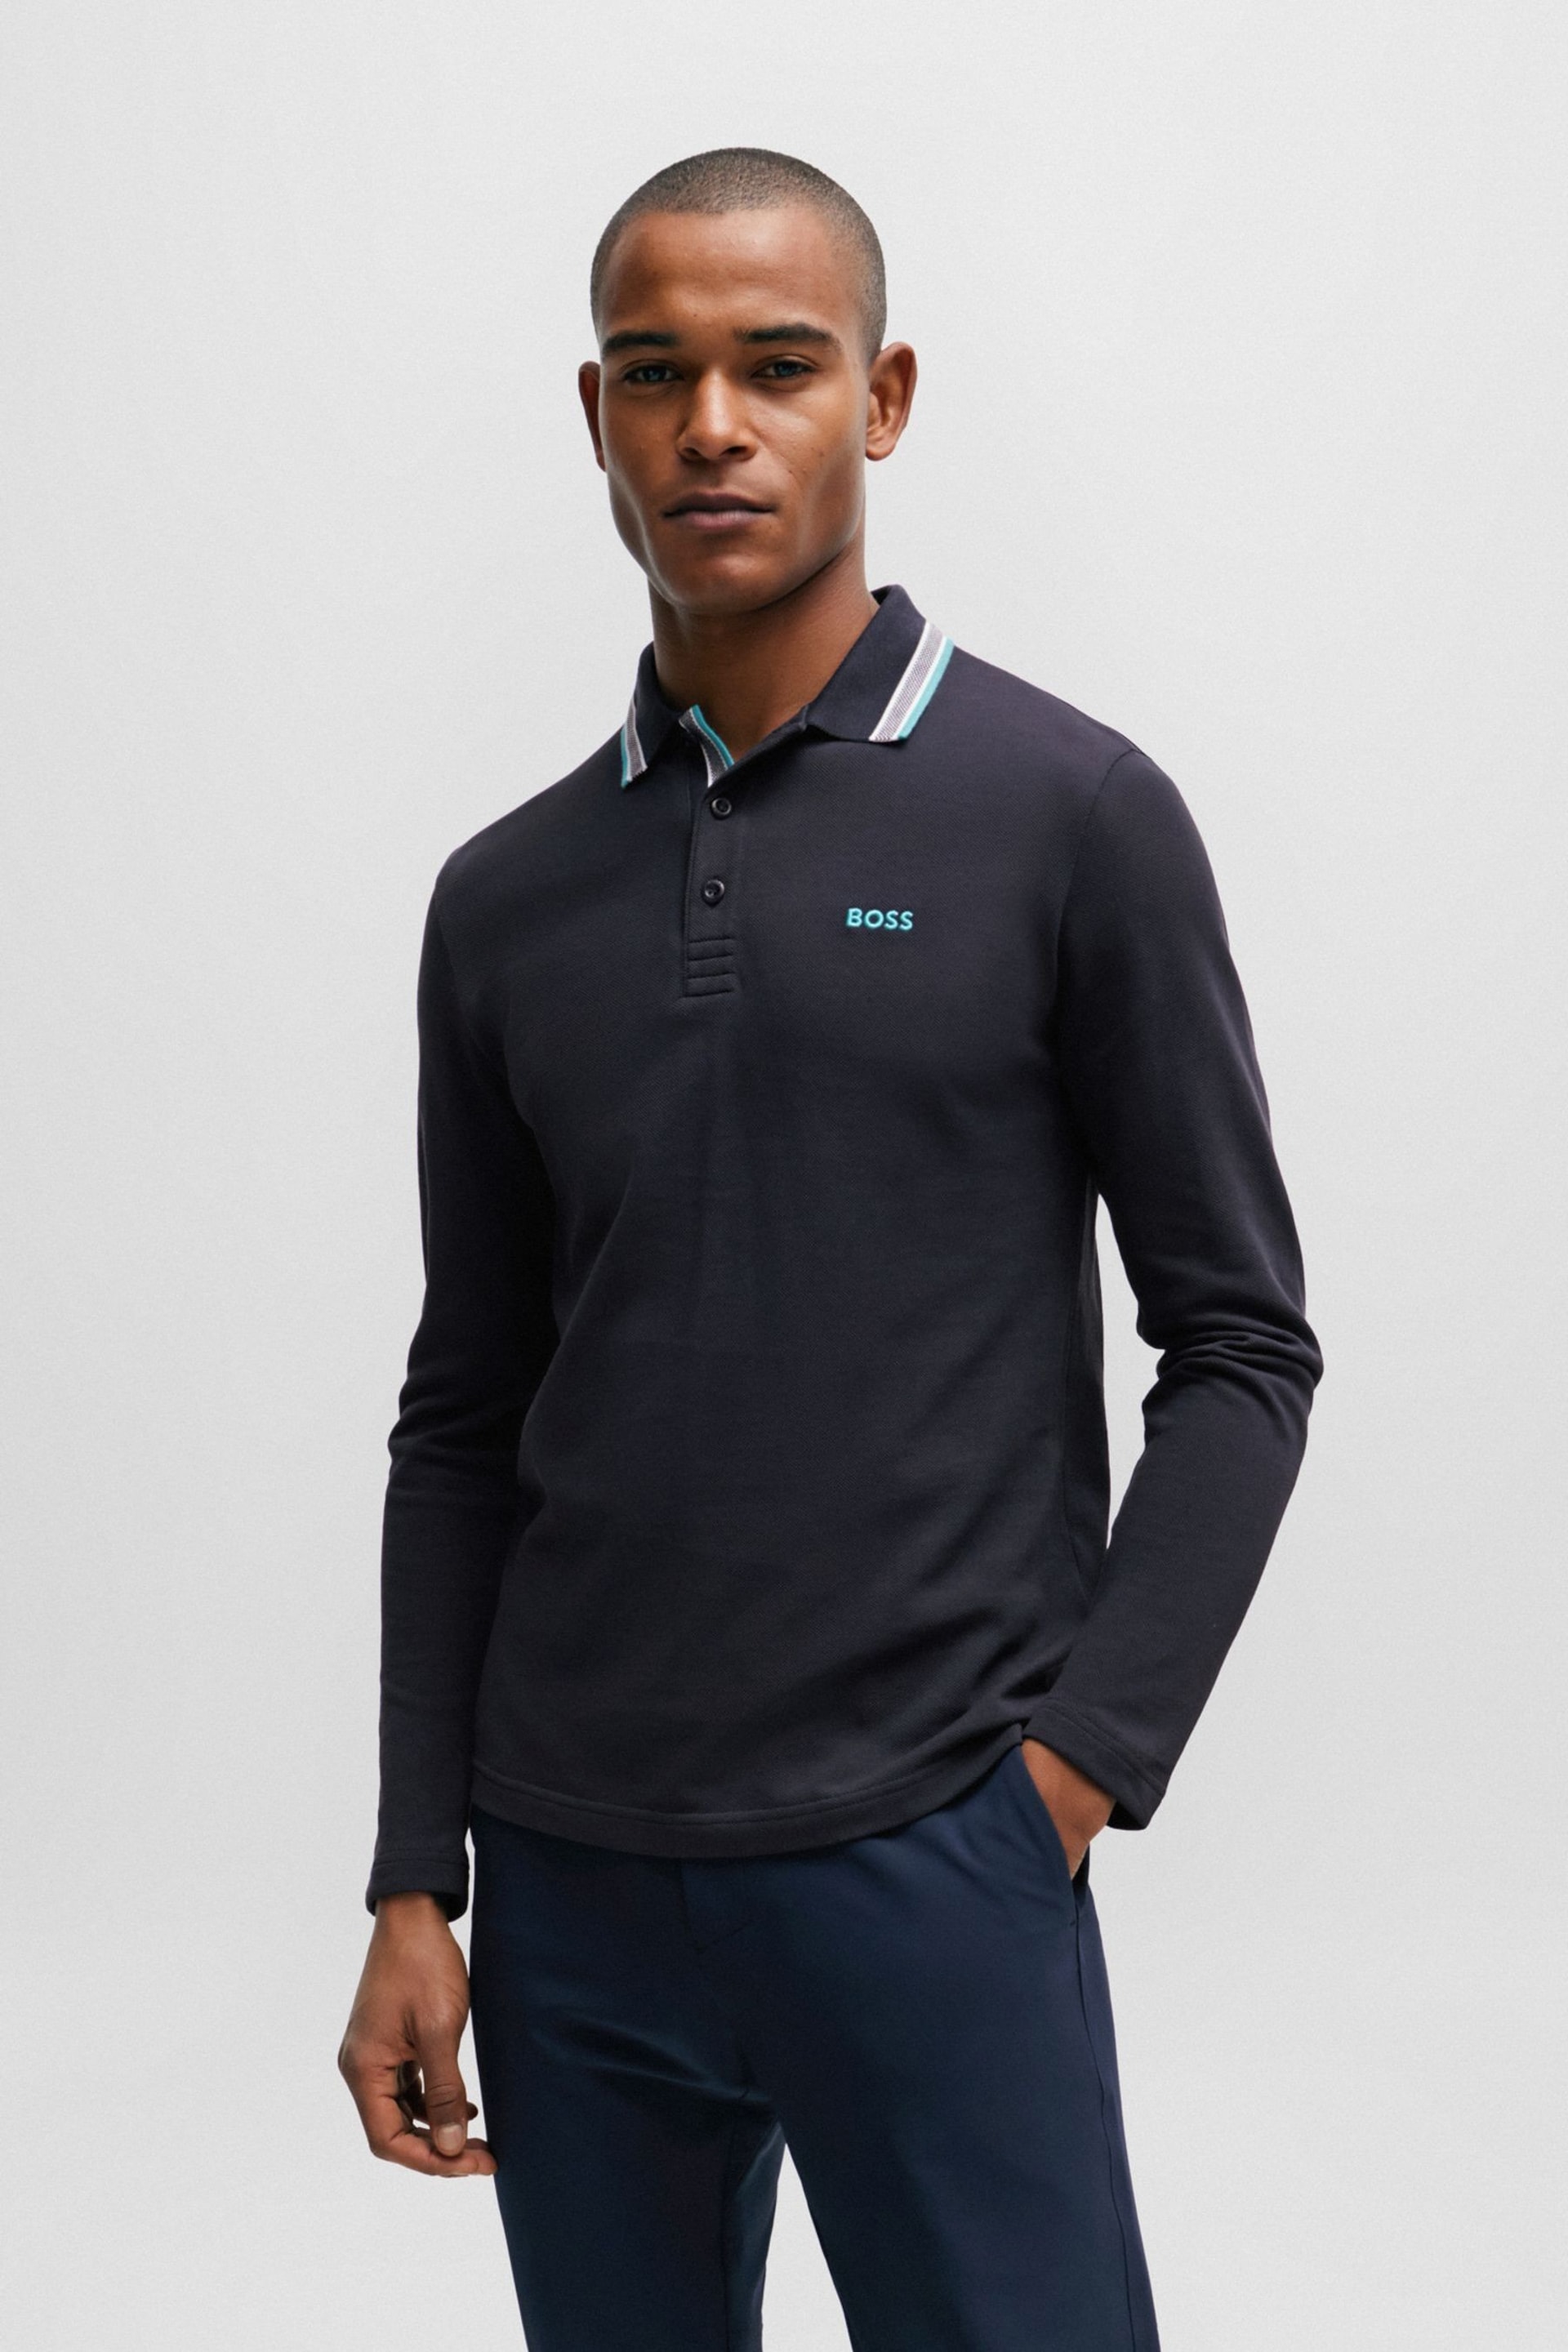 BOSS Blue Tipped Collar Long Sleeve Polo Shirt - Image 1 of 5